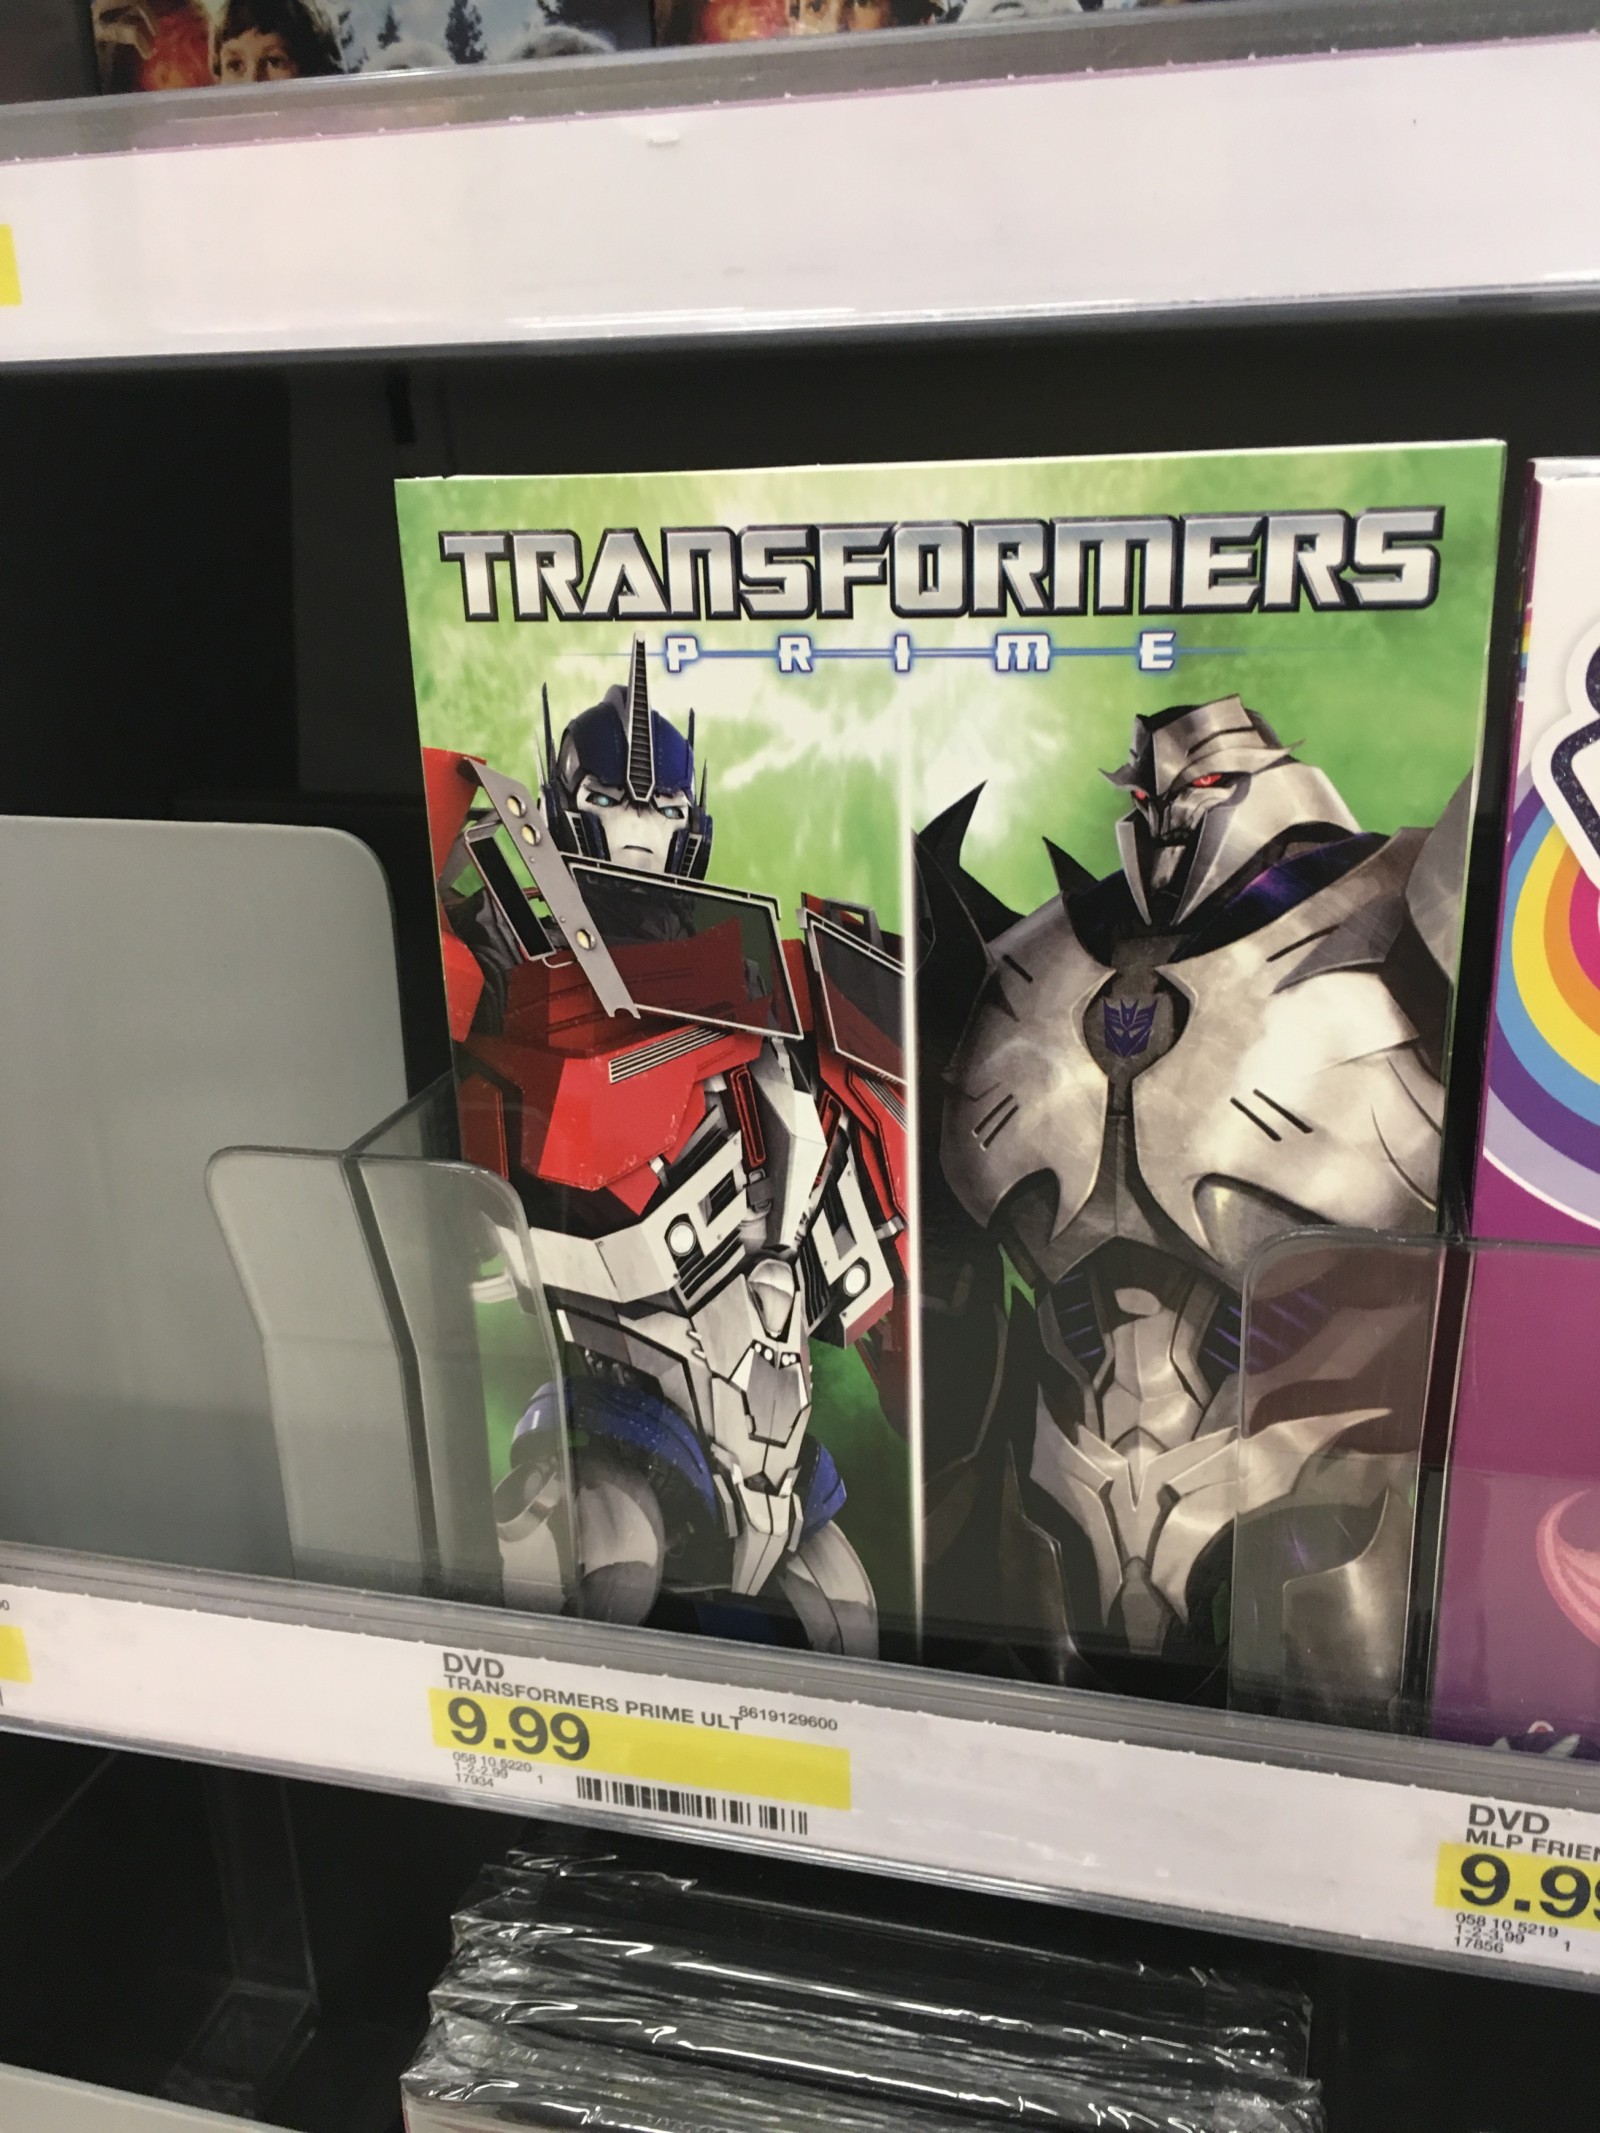 Transformers News: Transformers: Prime Ultimate rivals on DVD sighted in New York!